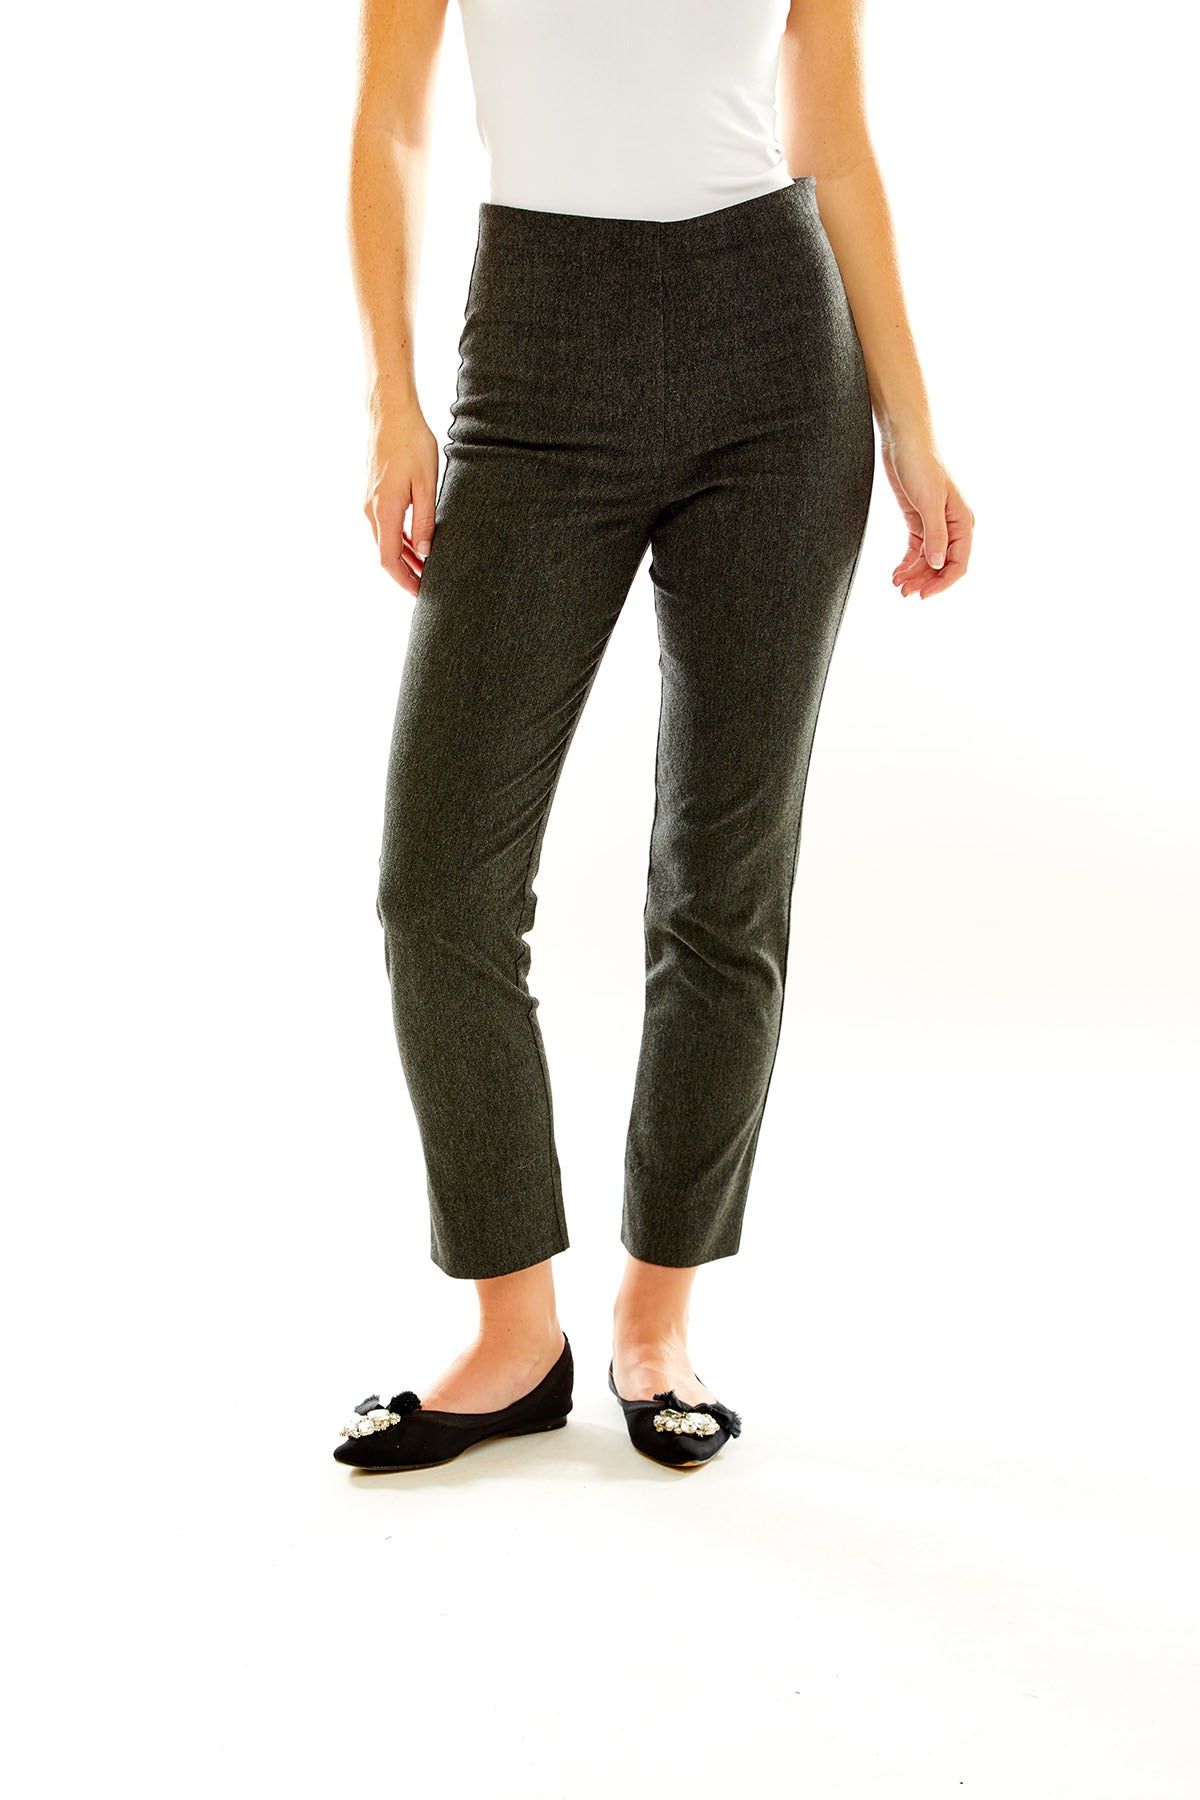 The Sara Campbell Flannel Sheri Pant in Charcoal Grey